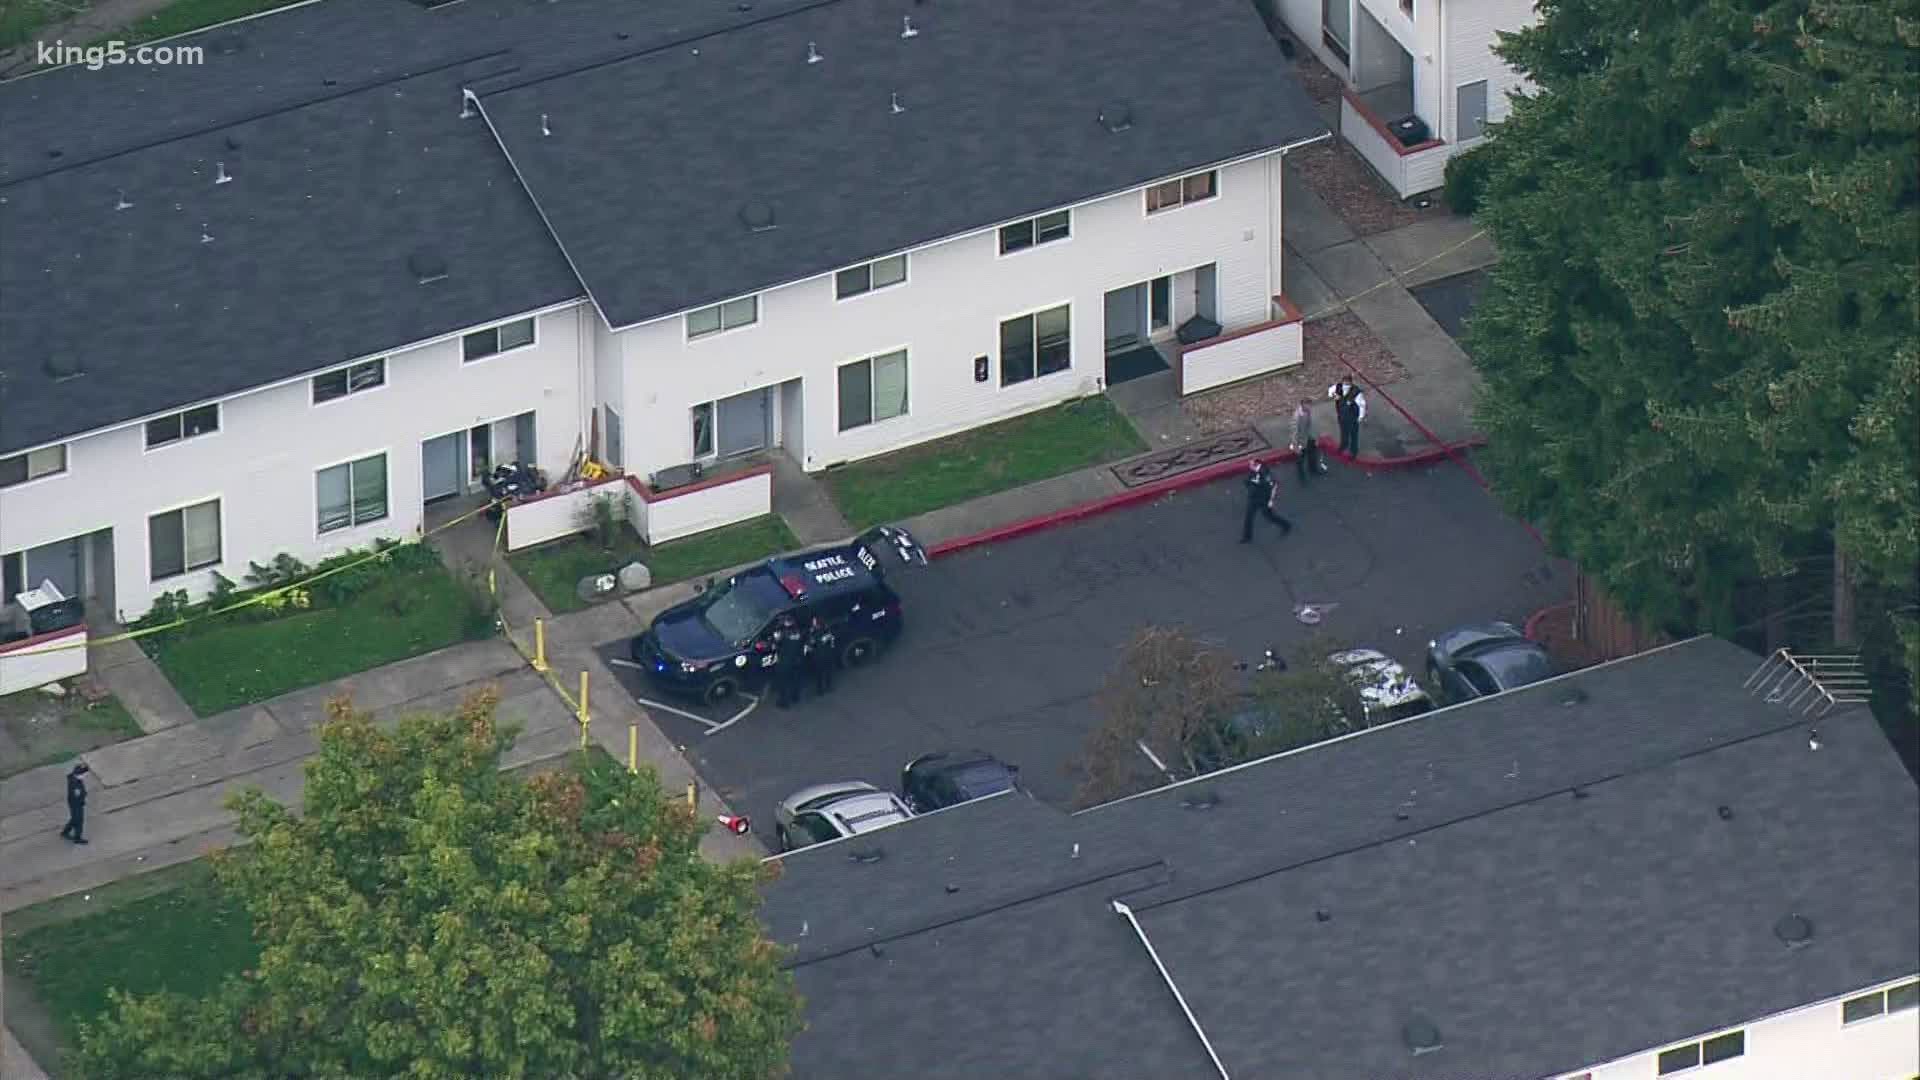 Seattle police confirm a 19-year-old has died after a shooting in Seattle's Northgate neighborhood Thursday afternoon.